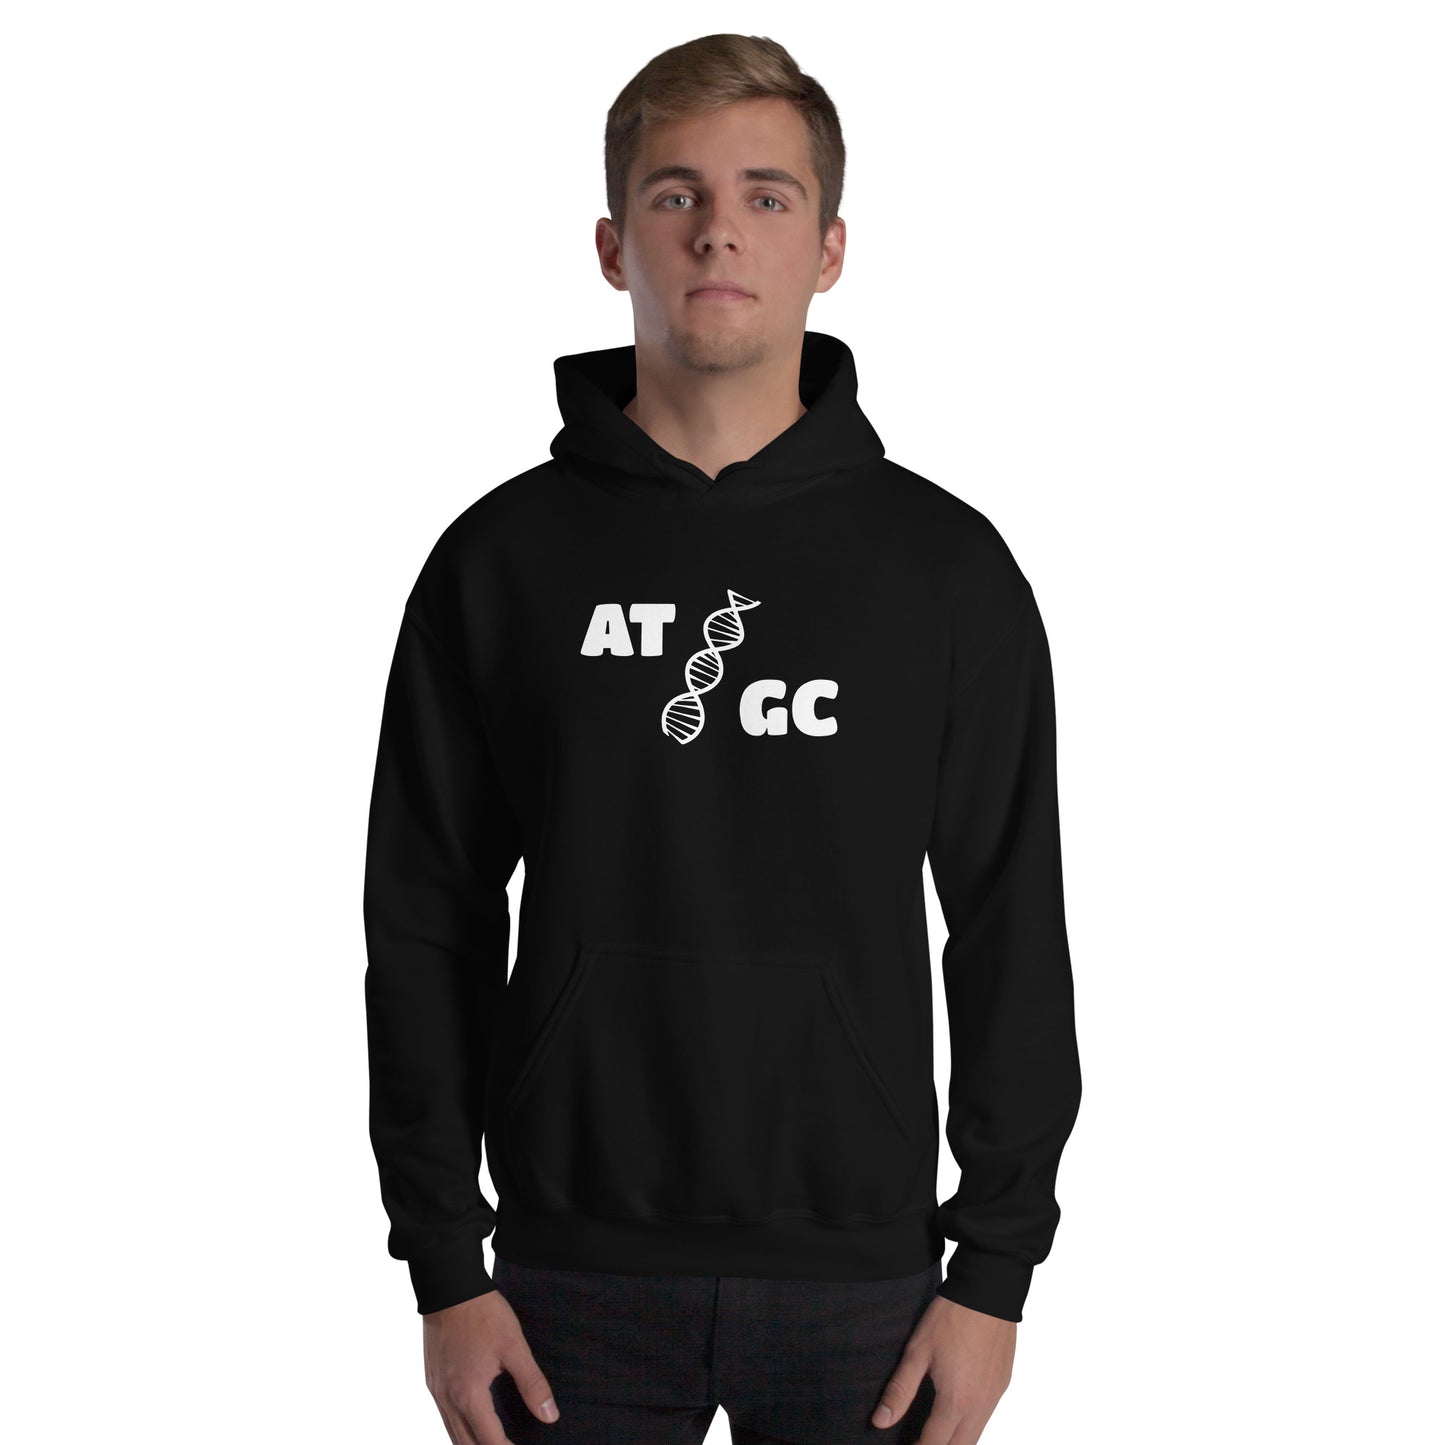 Men with black hoodie with image of a DNA string and the text "ATGC"